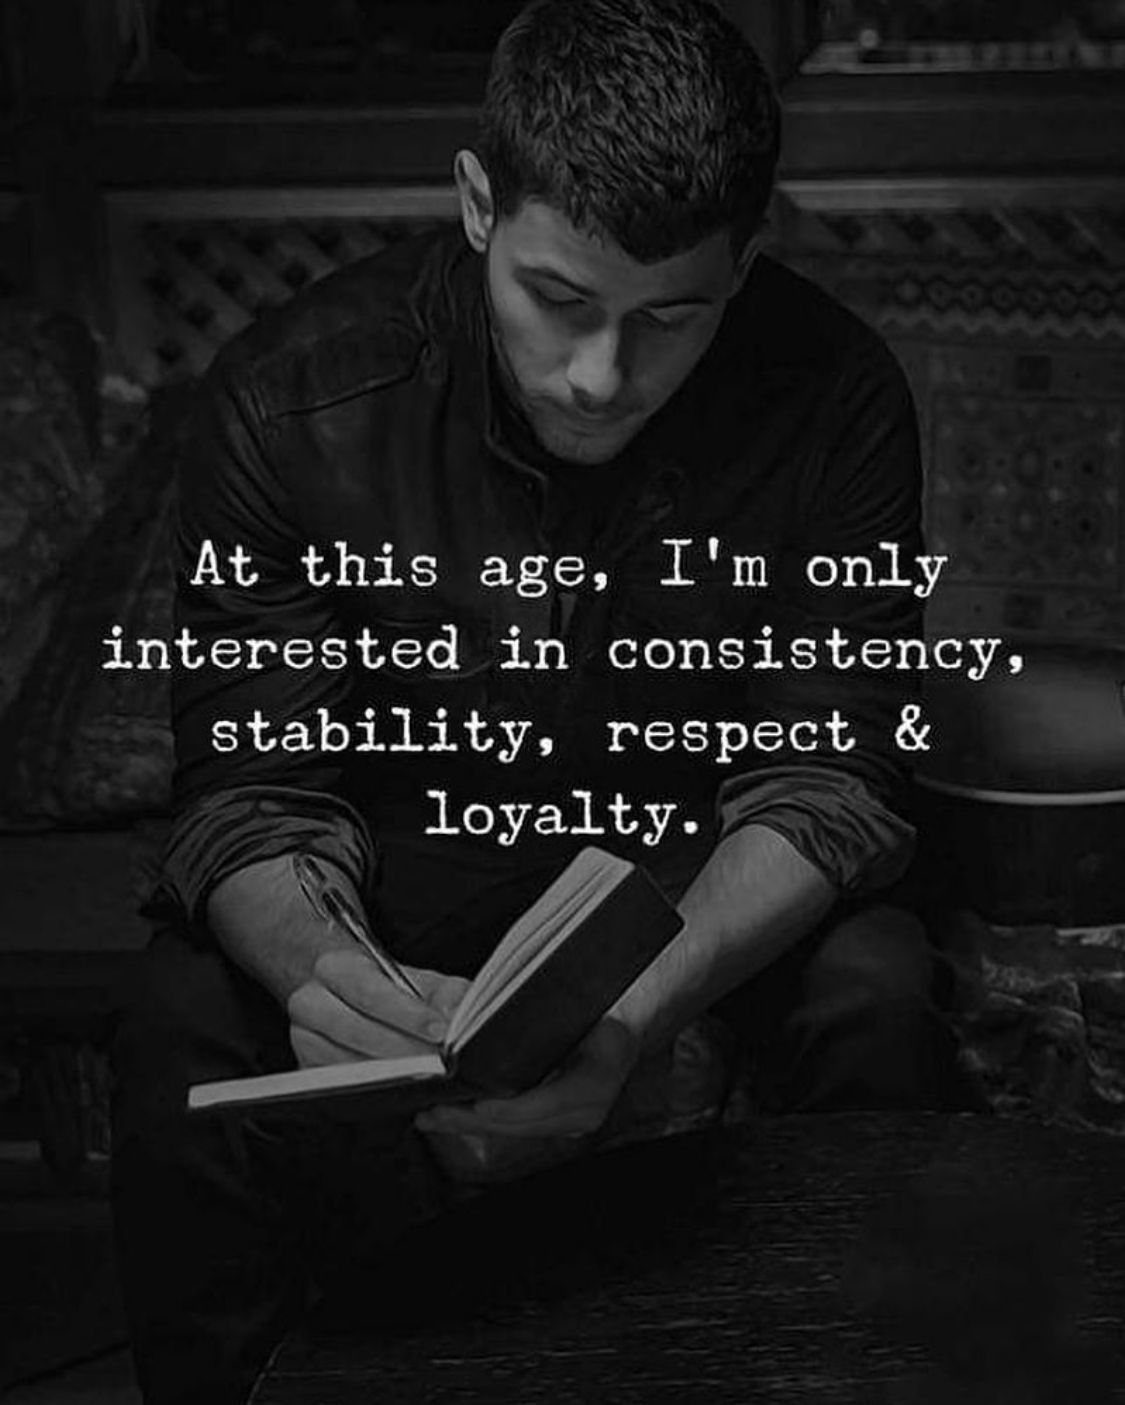 at this age, i'm only interested in consistency, stability, respect and loyalty